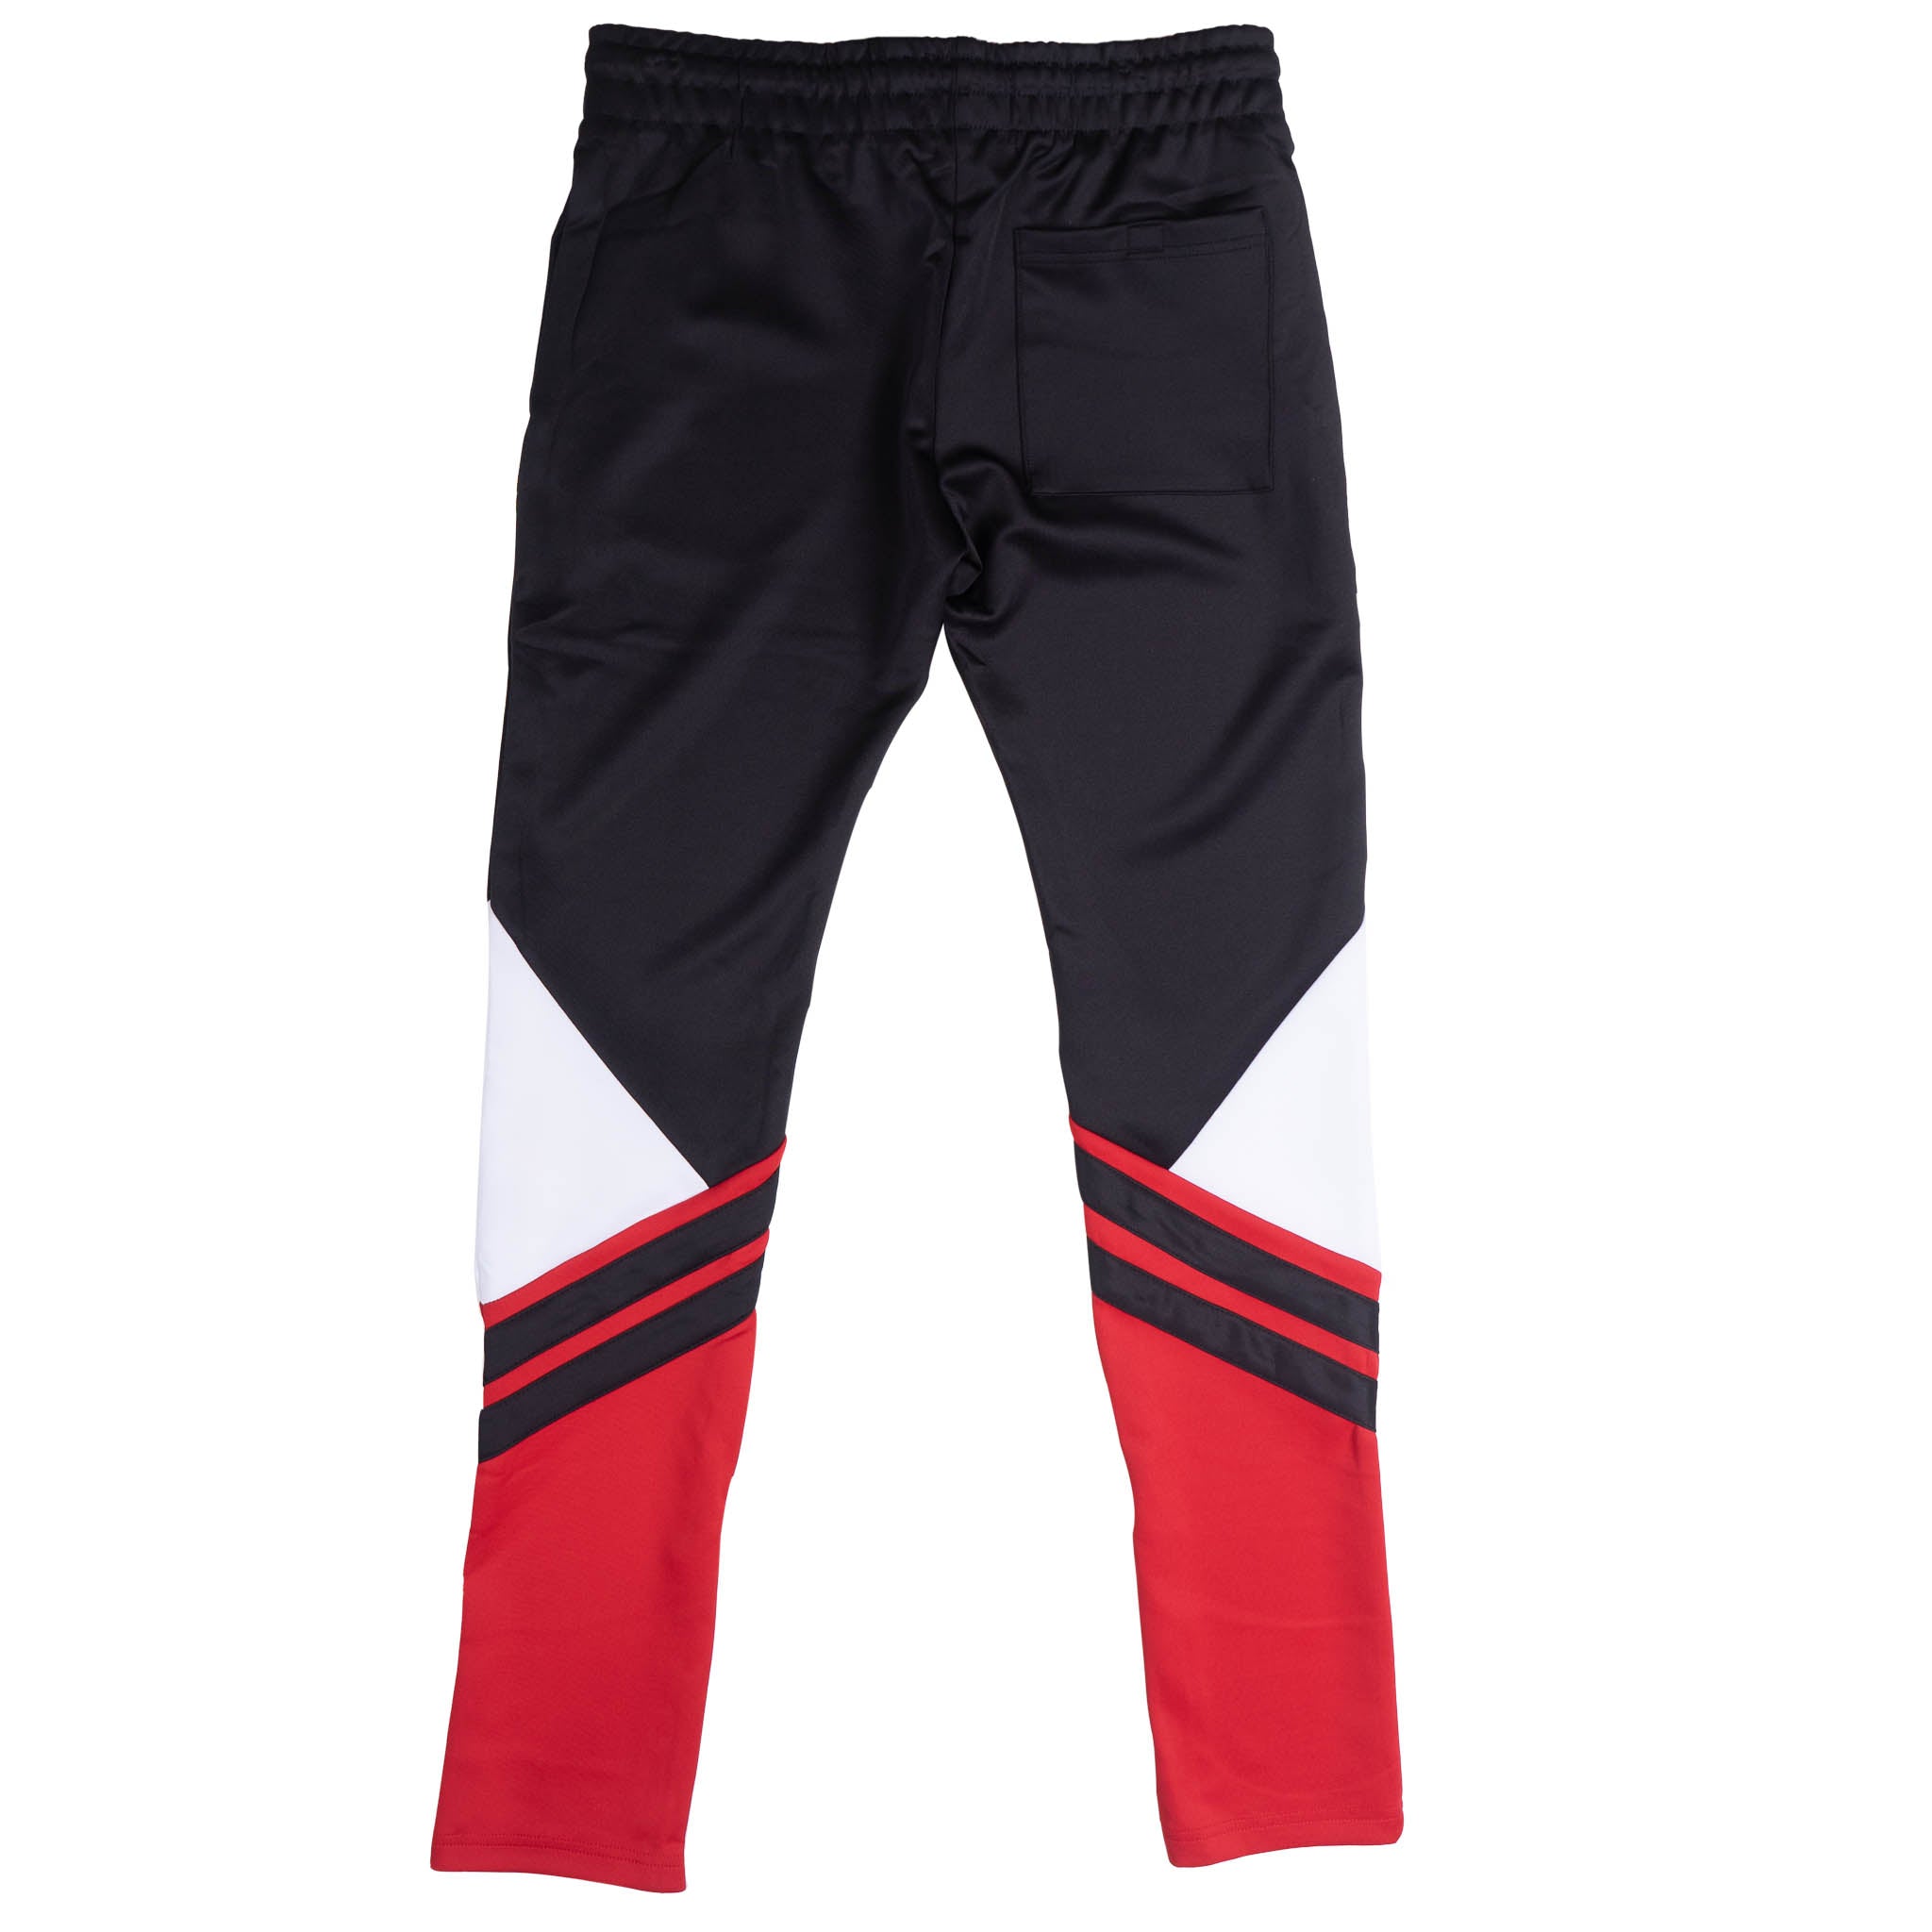 12 AM NATION COLOR BLOCK TRACK PANTS BLACK/WHITE/RED - 89213